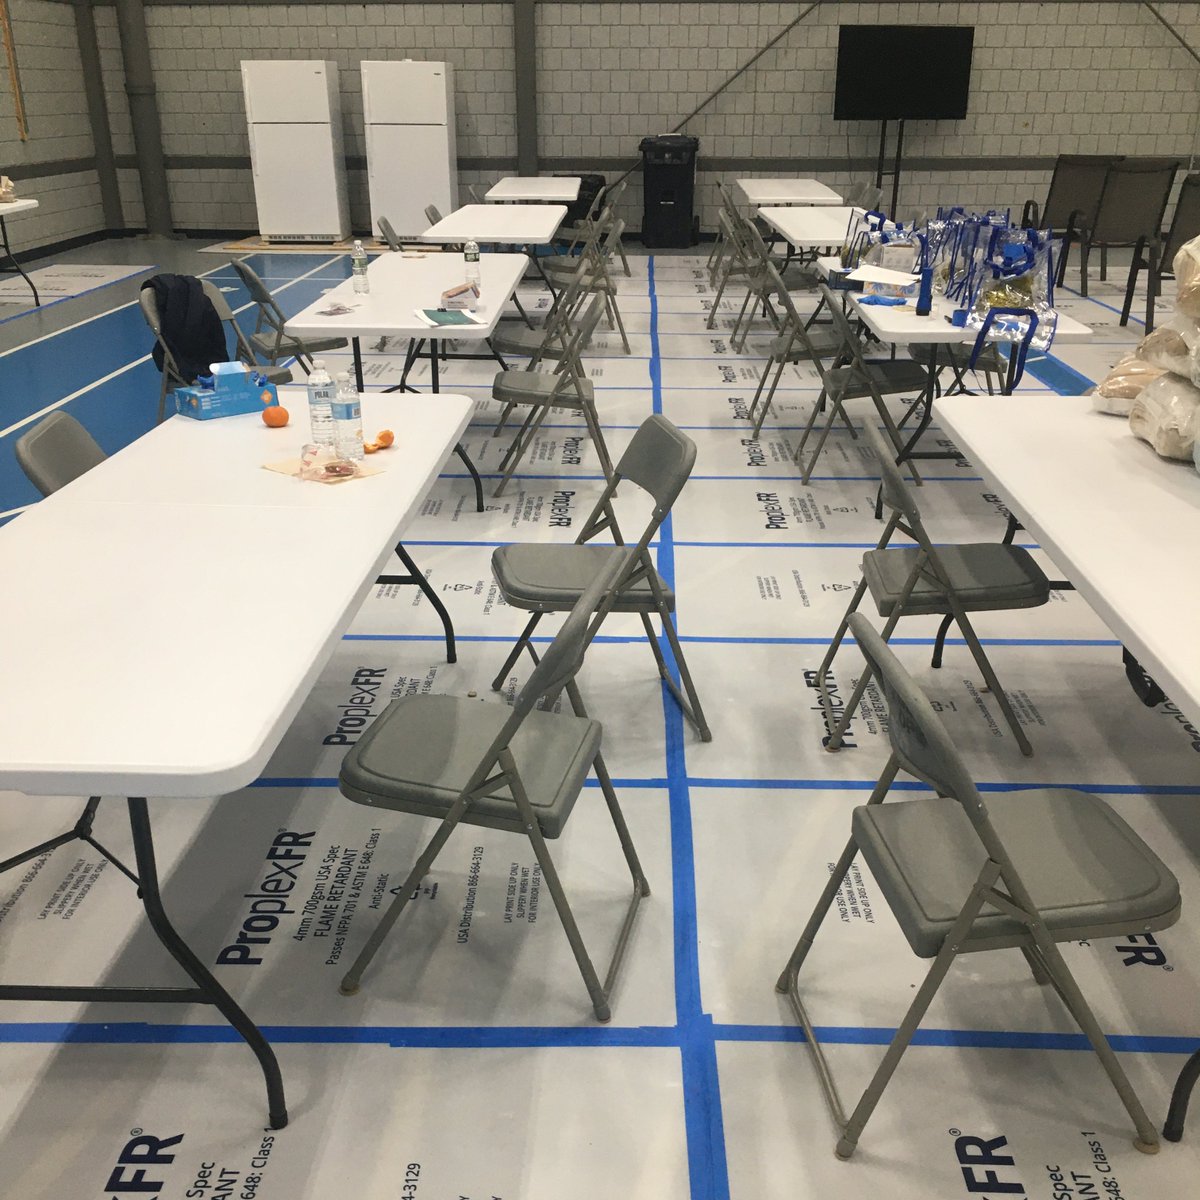 6/ Does this look safe to you? Here are just some of the things I've heard from folks staying @ the War Memorial shelter:-No privacy-Seated uncomfortably close together during meals-Sharing cigarettes -Not enough PPE-COVID-positive individuals have entered the facility